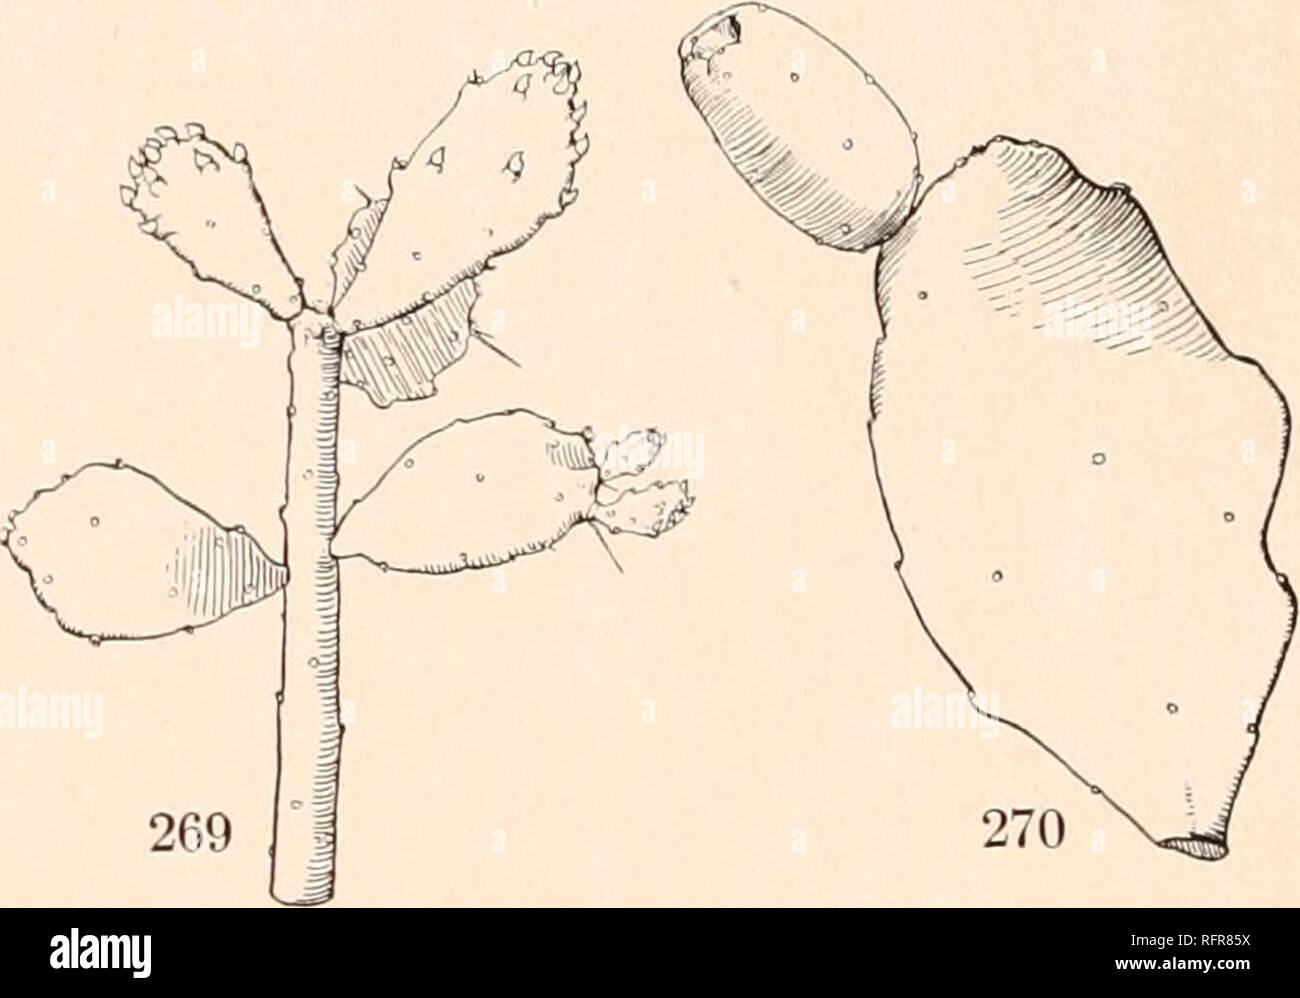 . Carnegie Institution of Washington publication. . FIG. 268.—Opuntia brasiliensis. FlGS. 269, 270.—Opuntia bahiensis. Xo.5. Garden; figure 3 is from the same plant, showing terete and flat joints. Figure 267 repre- sents a fruit collected by Dr. Rose near Iguaba Grande, Brazil, in 1915; figure 268 is from a photograph taken by Paul G. Russell in a public park in Bahia, Brazil. 237. Opuntia bahiensis sp. nov. Trunk 3 to 15 meters high, cylindric, 20 to 25 cm. in diameter, tapering gradually upward; the center of trunk pithy, hollow in age, surrounded by an open woody cylinder; lateral joints t Stock Photo